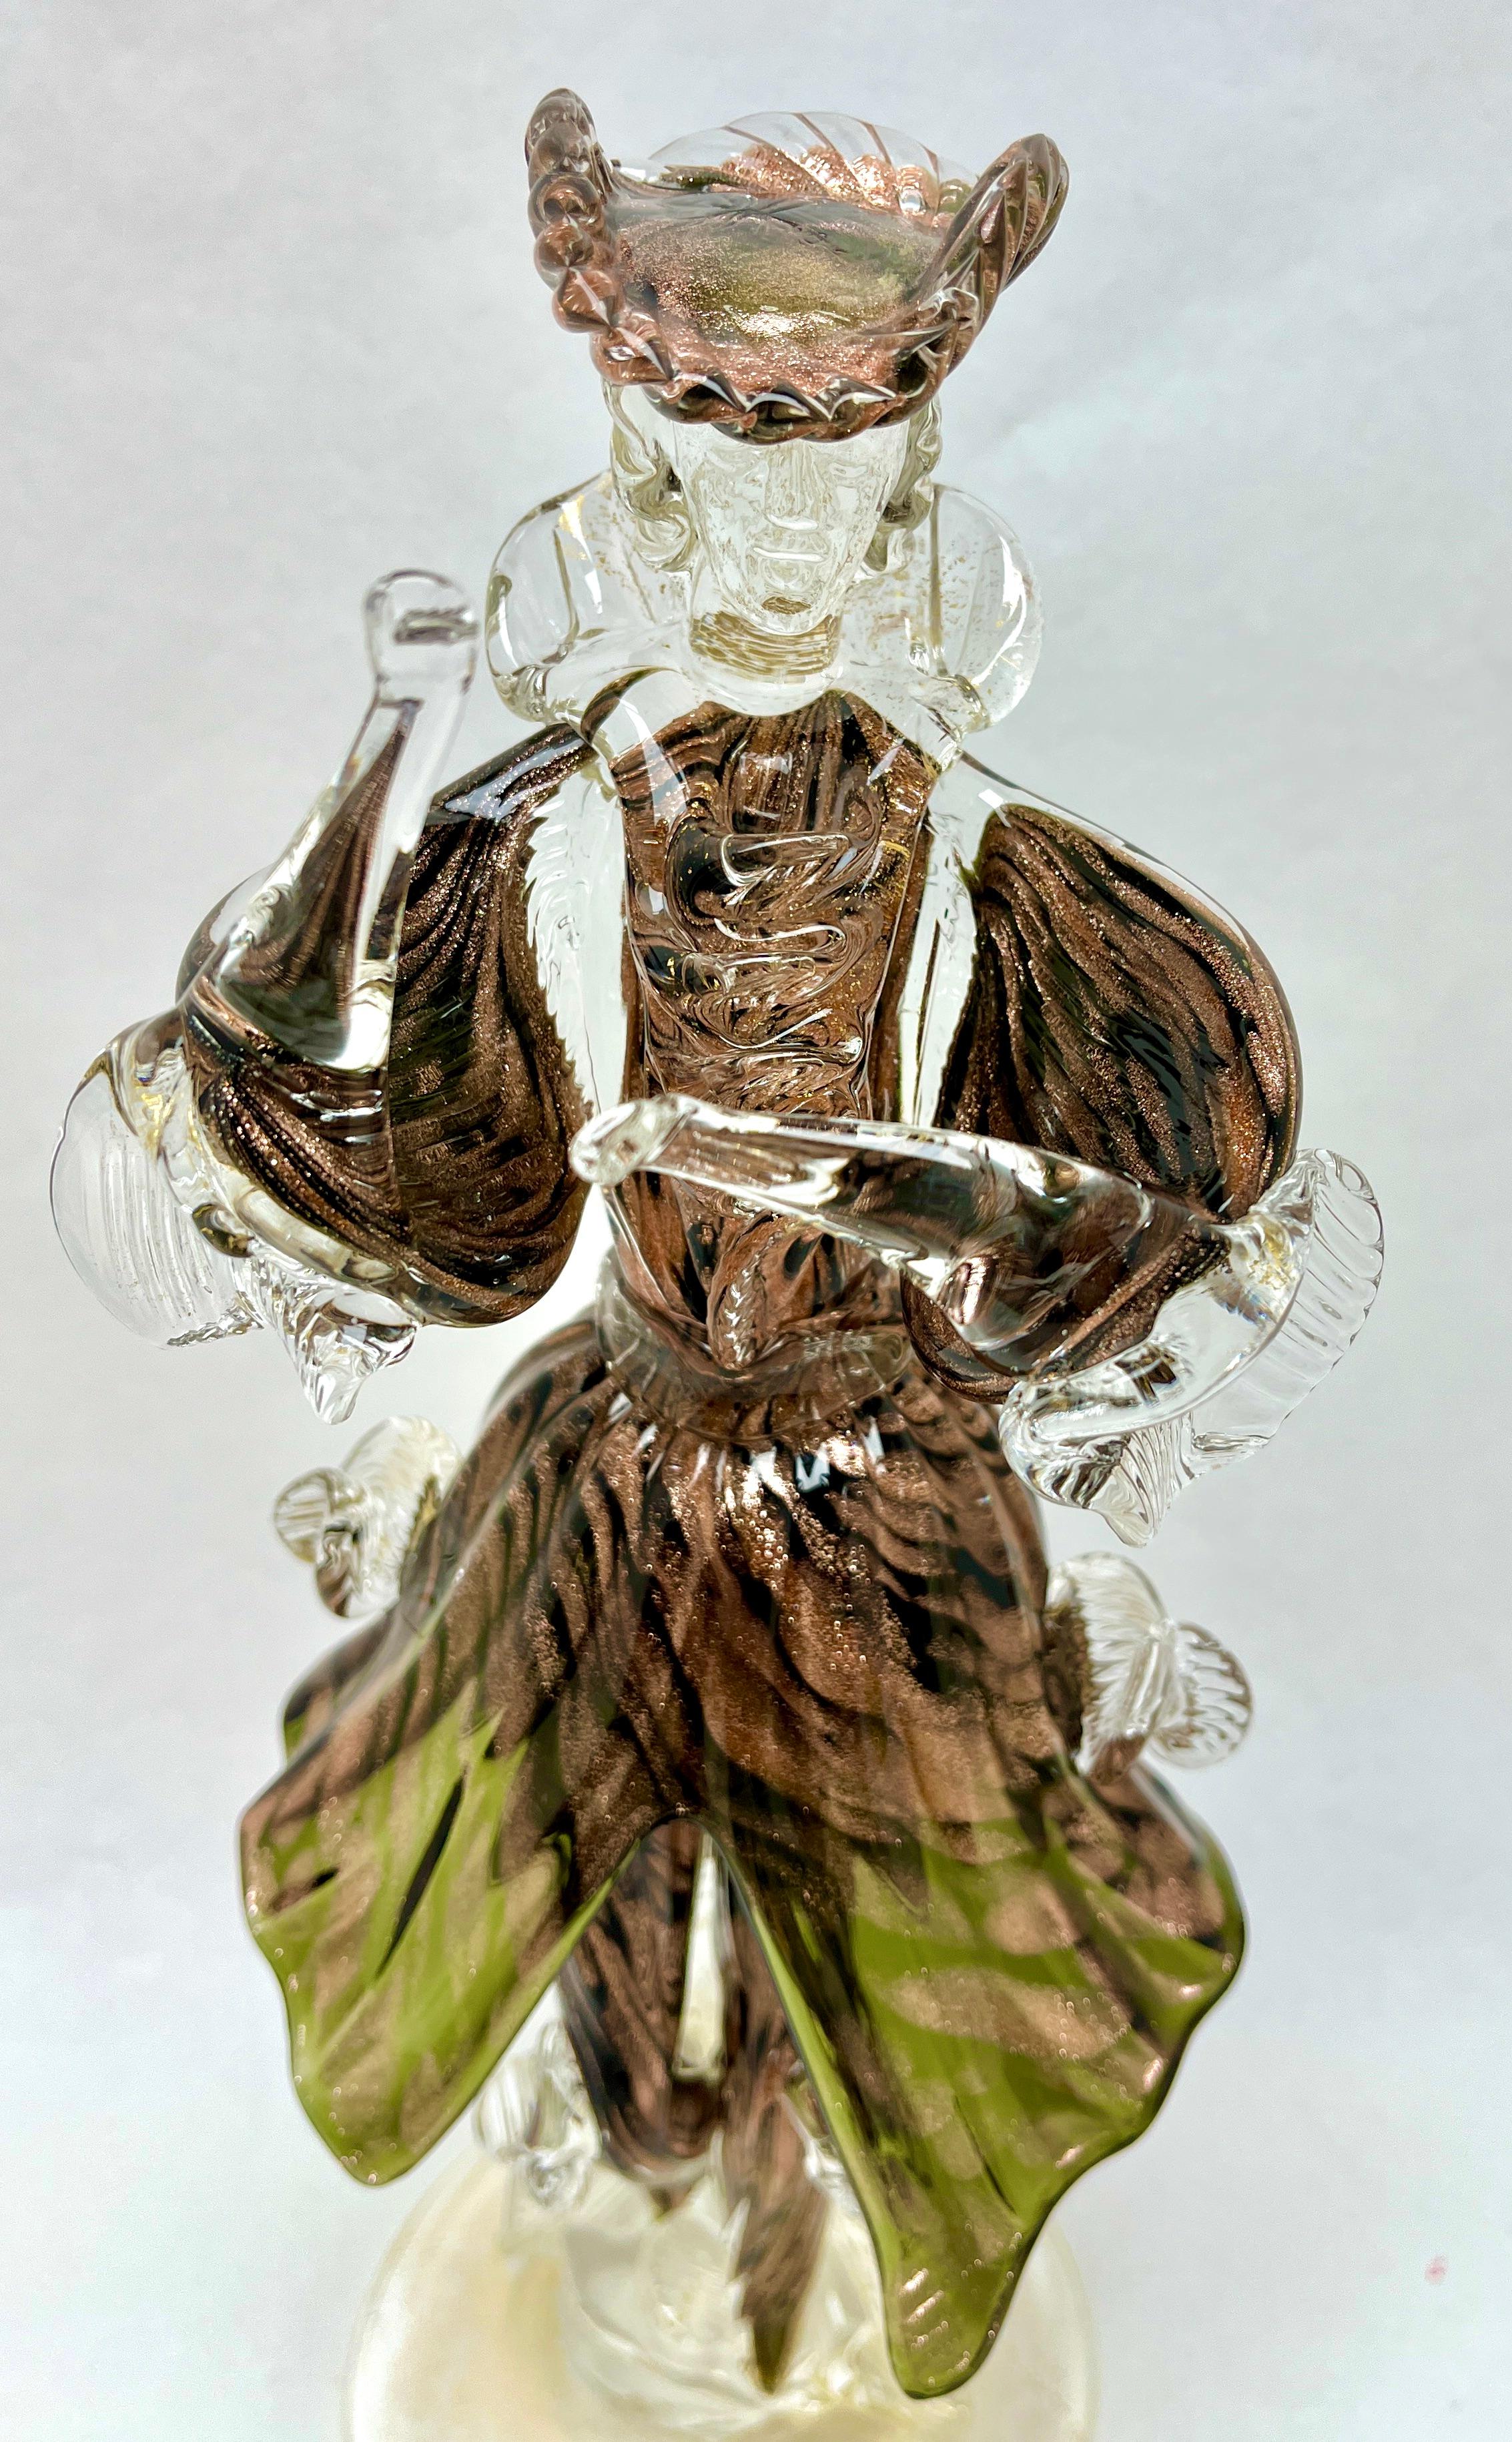 Murano Sommerso gold flecks Italian art glass harlequin figurine.

Beautiful murano hand blown sommerso and gold flecks Italian art glass harlequin Sculpture.
The piece is Profusely covered in gold Leaf. Nice Detailed.

Please don't hesitate to